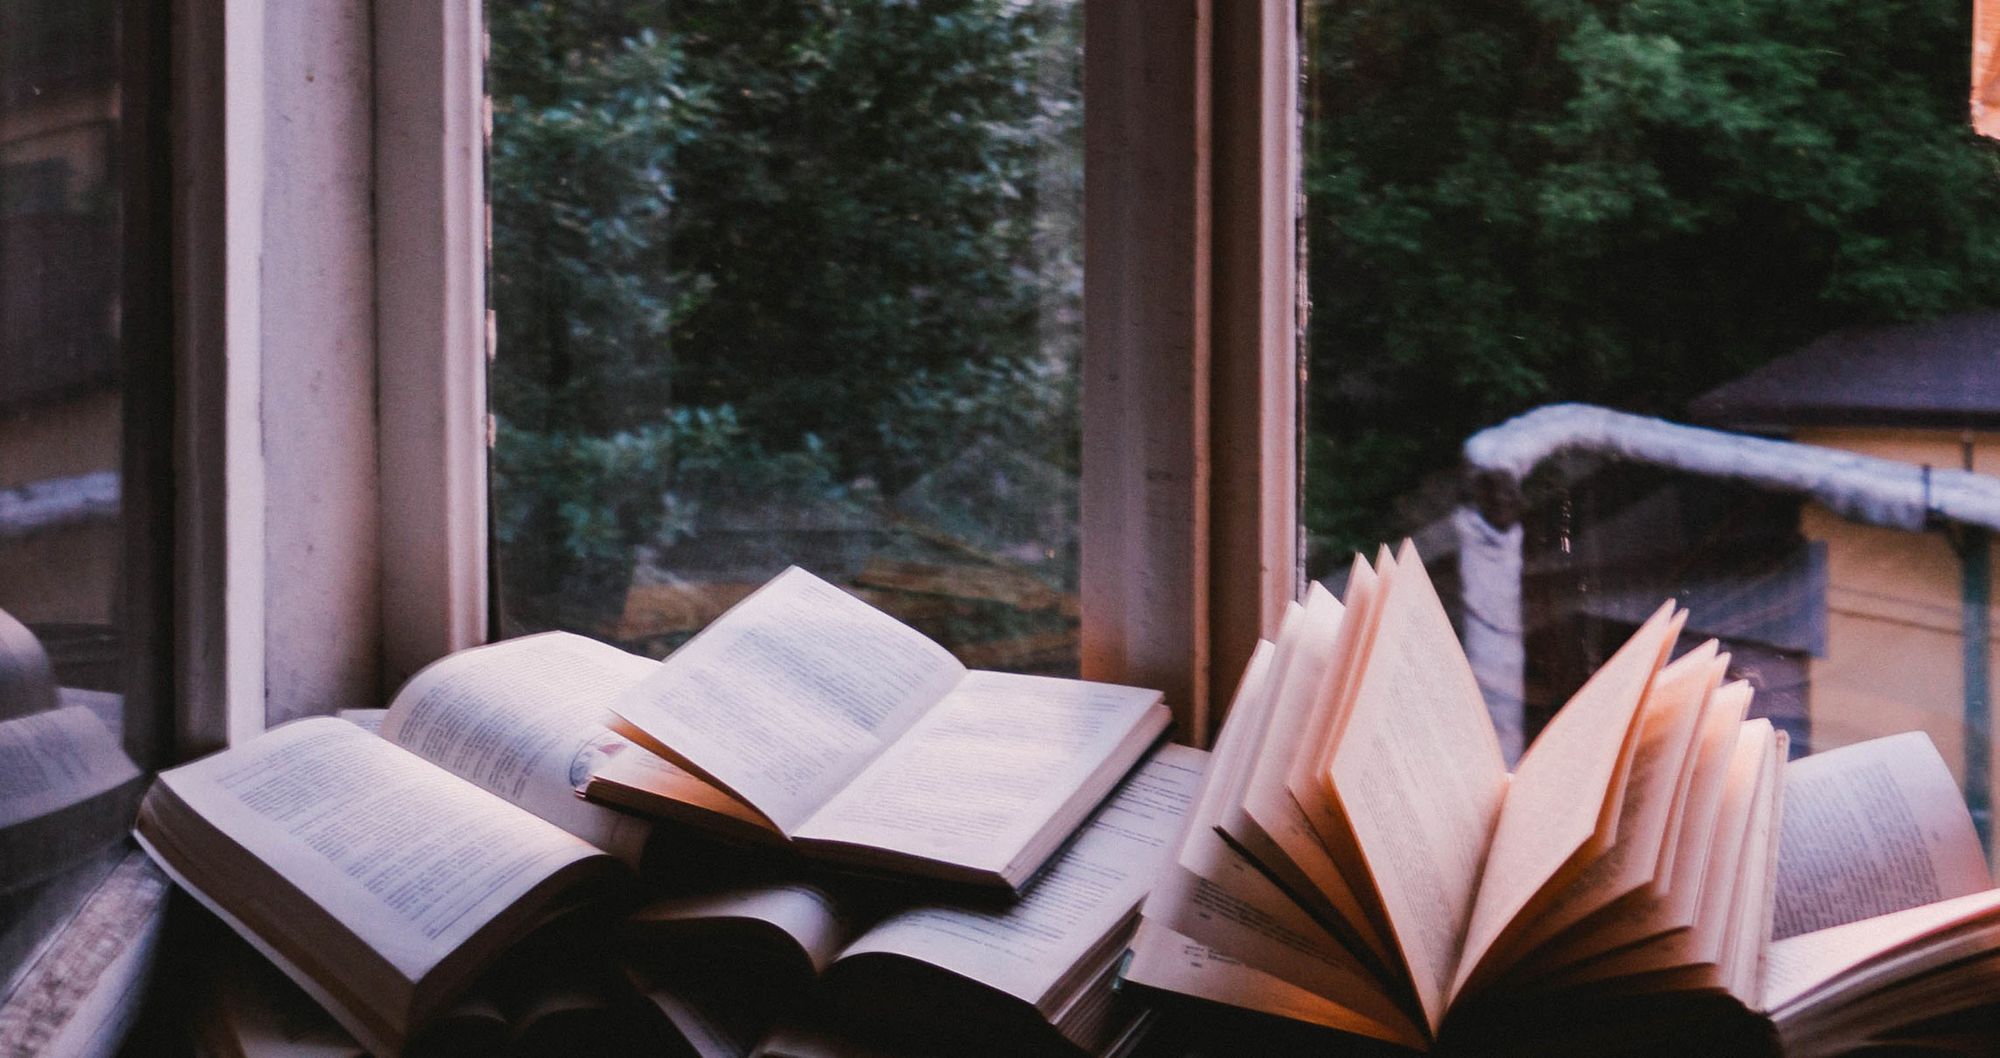 Open books in front of a window with a view of evergreen trees